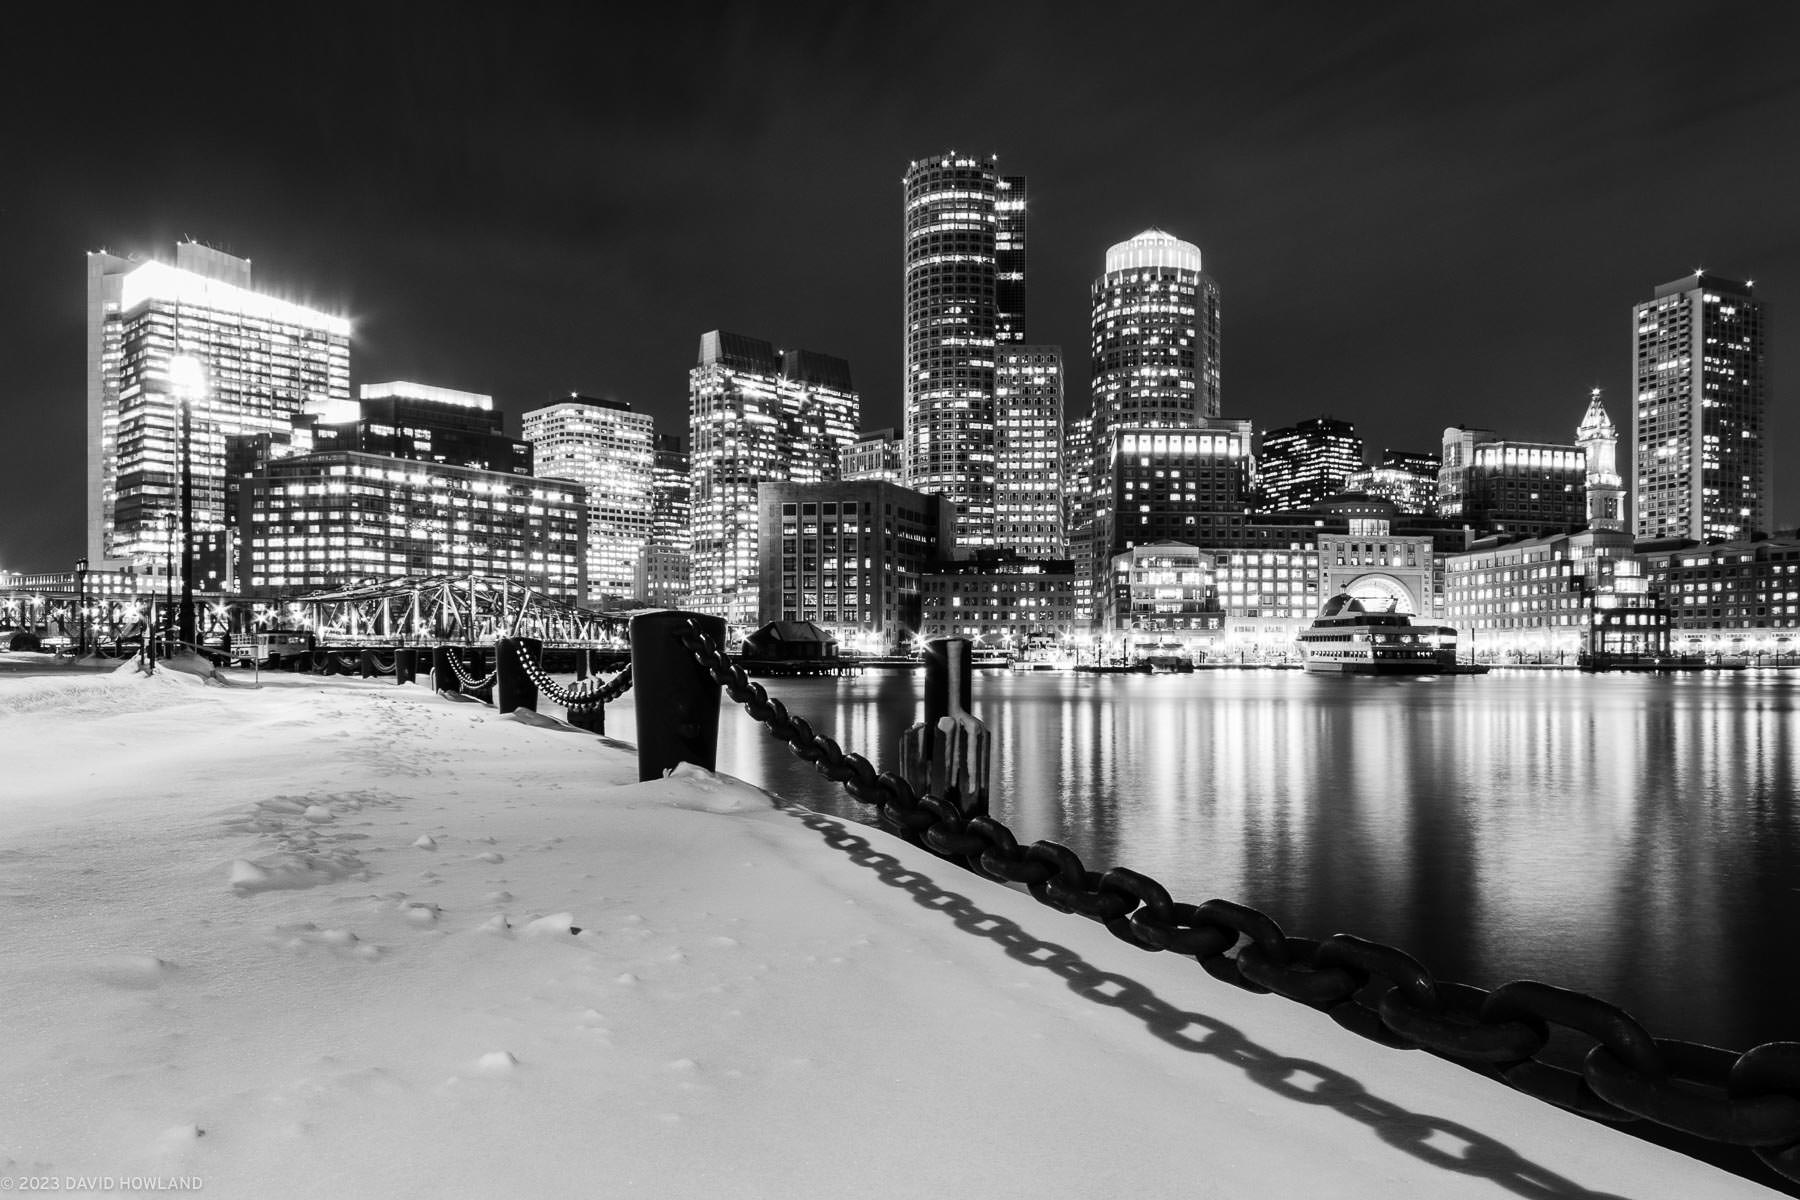 A black and white photo of the illuminated Boston skyline above the waters of Boston Harbor and a snow covered walkway.